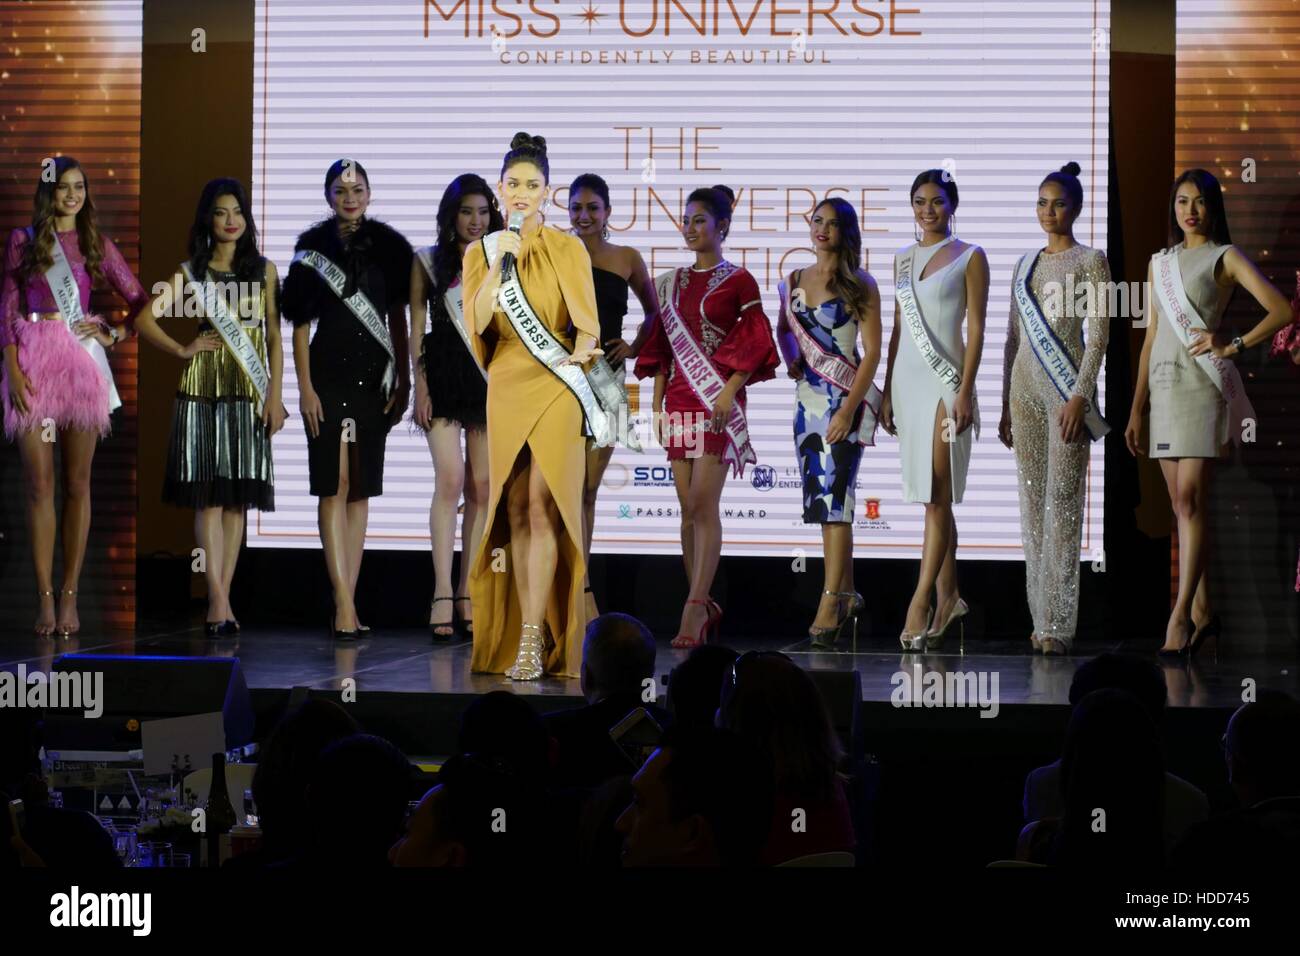 Pia Wurtzbach is presenting herself and the 10 Miss Universe Candidates that came from (L - R) Australia, Japan, Indonesia, Korea, Malaysia, Myanmar, New Zealand, Philippines, Thailand, Vietnam and USA. Miss Universe officially started in the Philippines with its Kick-off Party at S Maison Mall, Conrad Hotel, SM Mall of Asia, Pasay City at 7:00pm. Presented with Pia Wurtzbach, reigning Miss Universe, candidates from Australia, Japan, Indonesia, Korea, Malaysia, Myanmar, New Zealand, Philippines, Thailand, Vietnam and USA. (Photo by George Buid/Pacific Press) Stock Photo